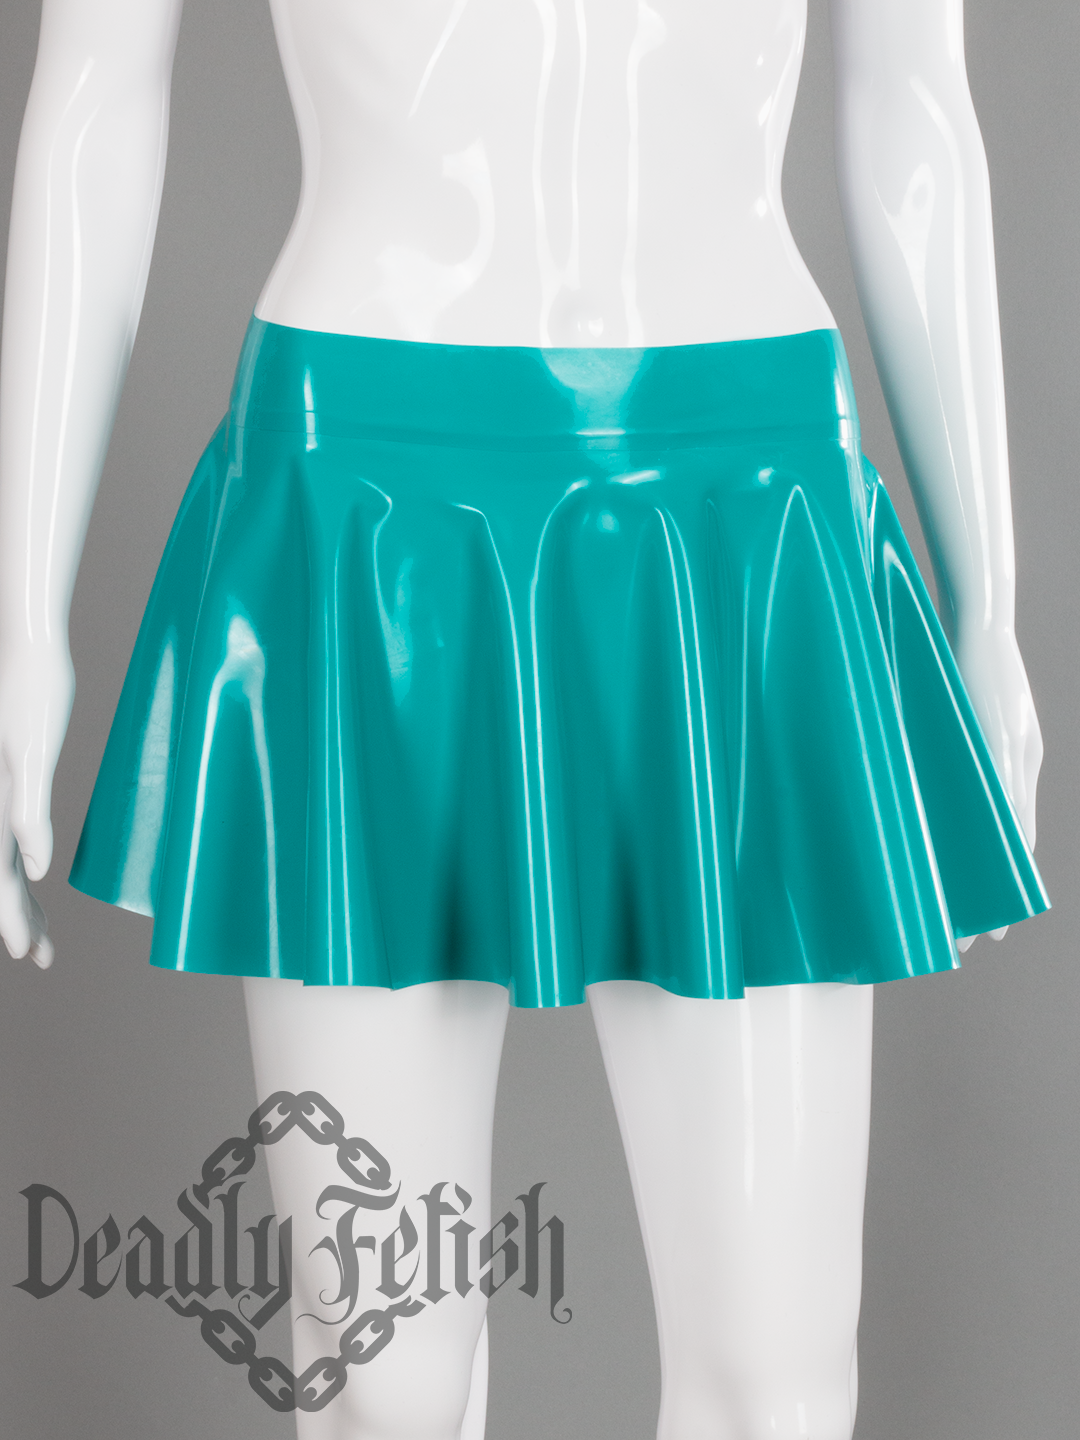 Deadly Fetish Made-To-Order Latex: Skirt #07